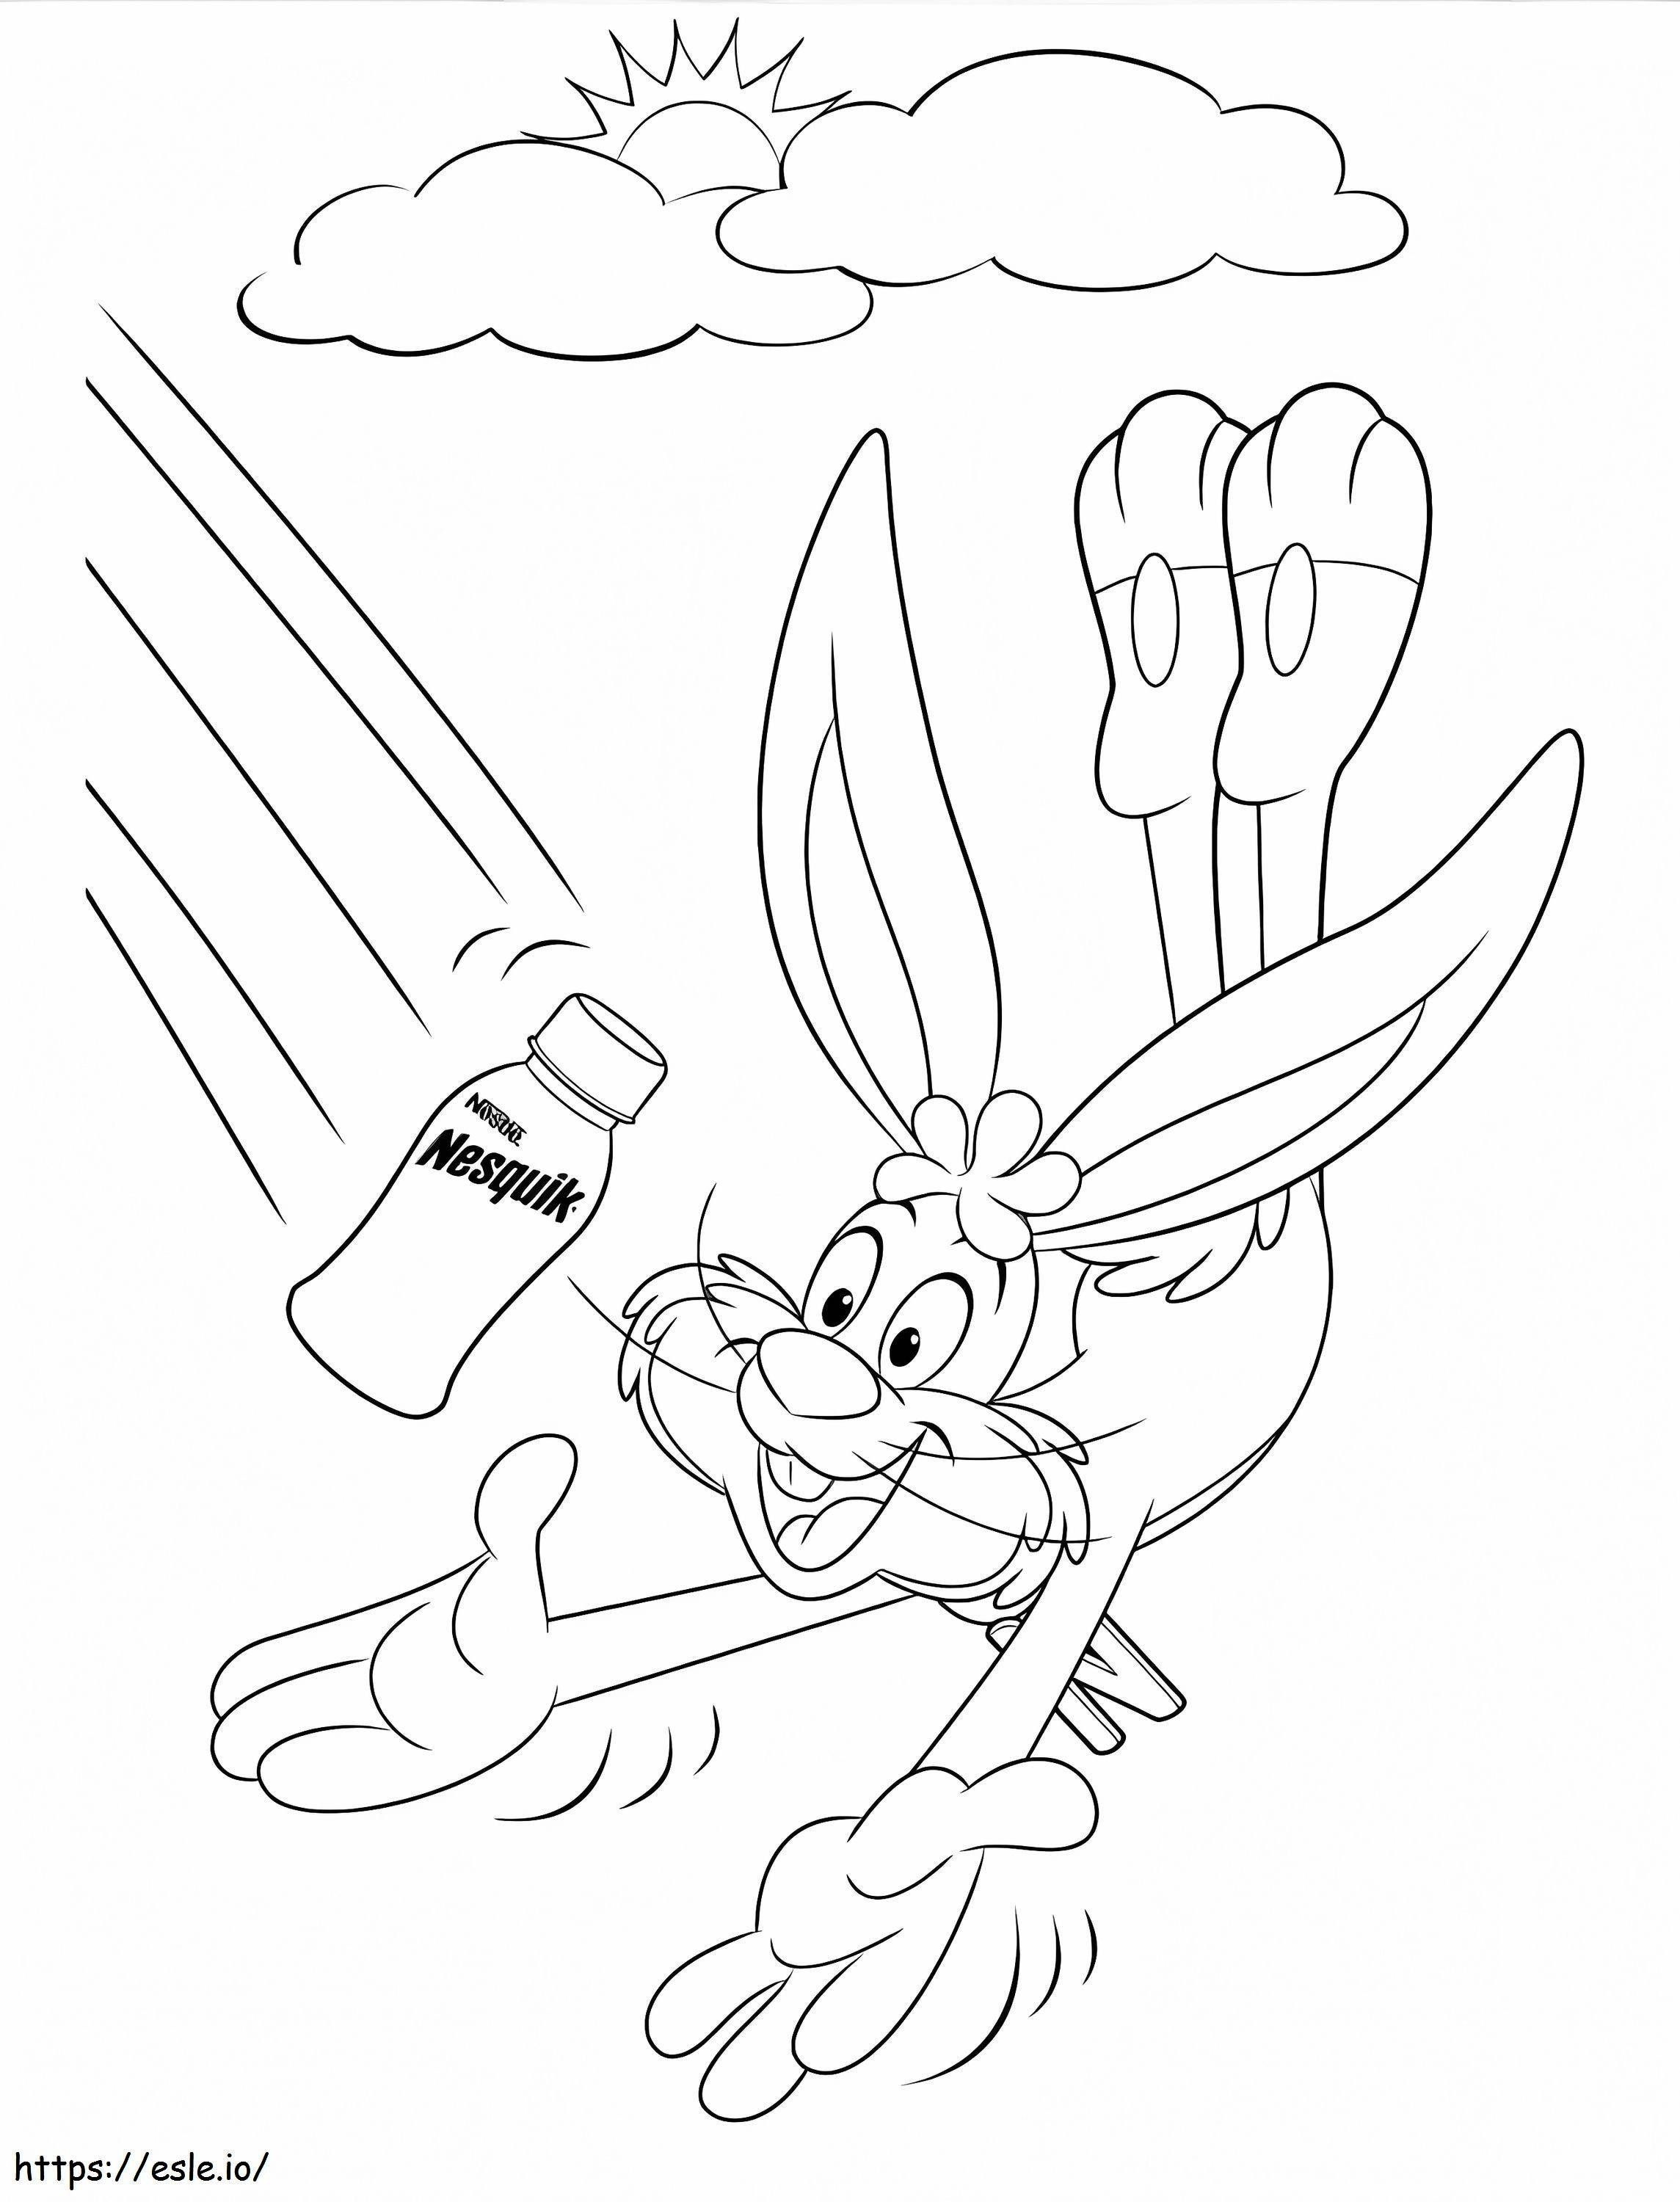 Printable Nesquik coloring page